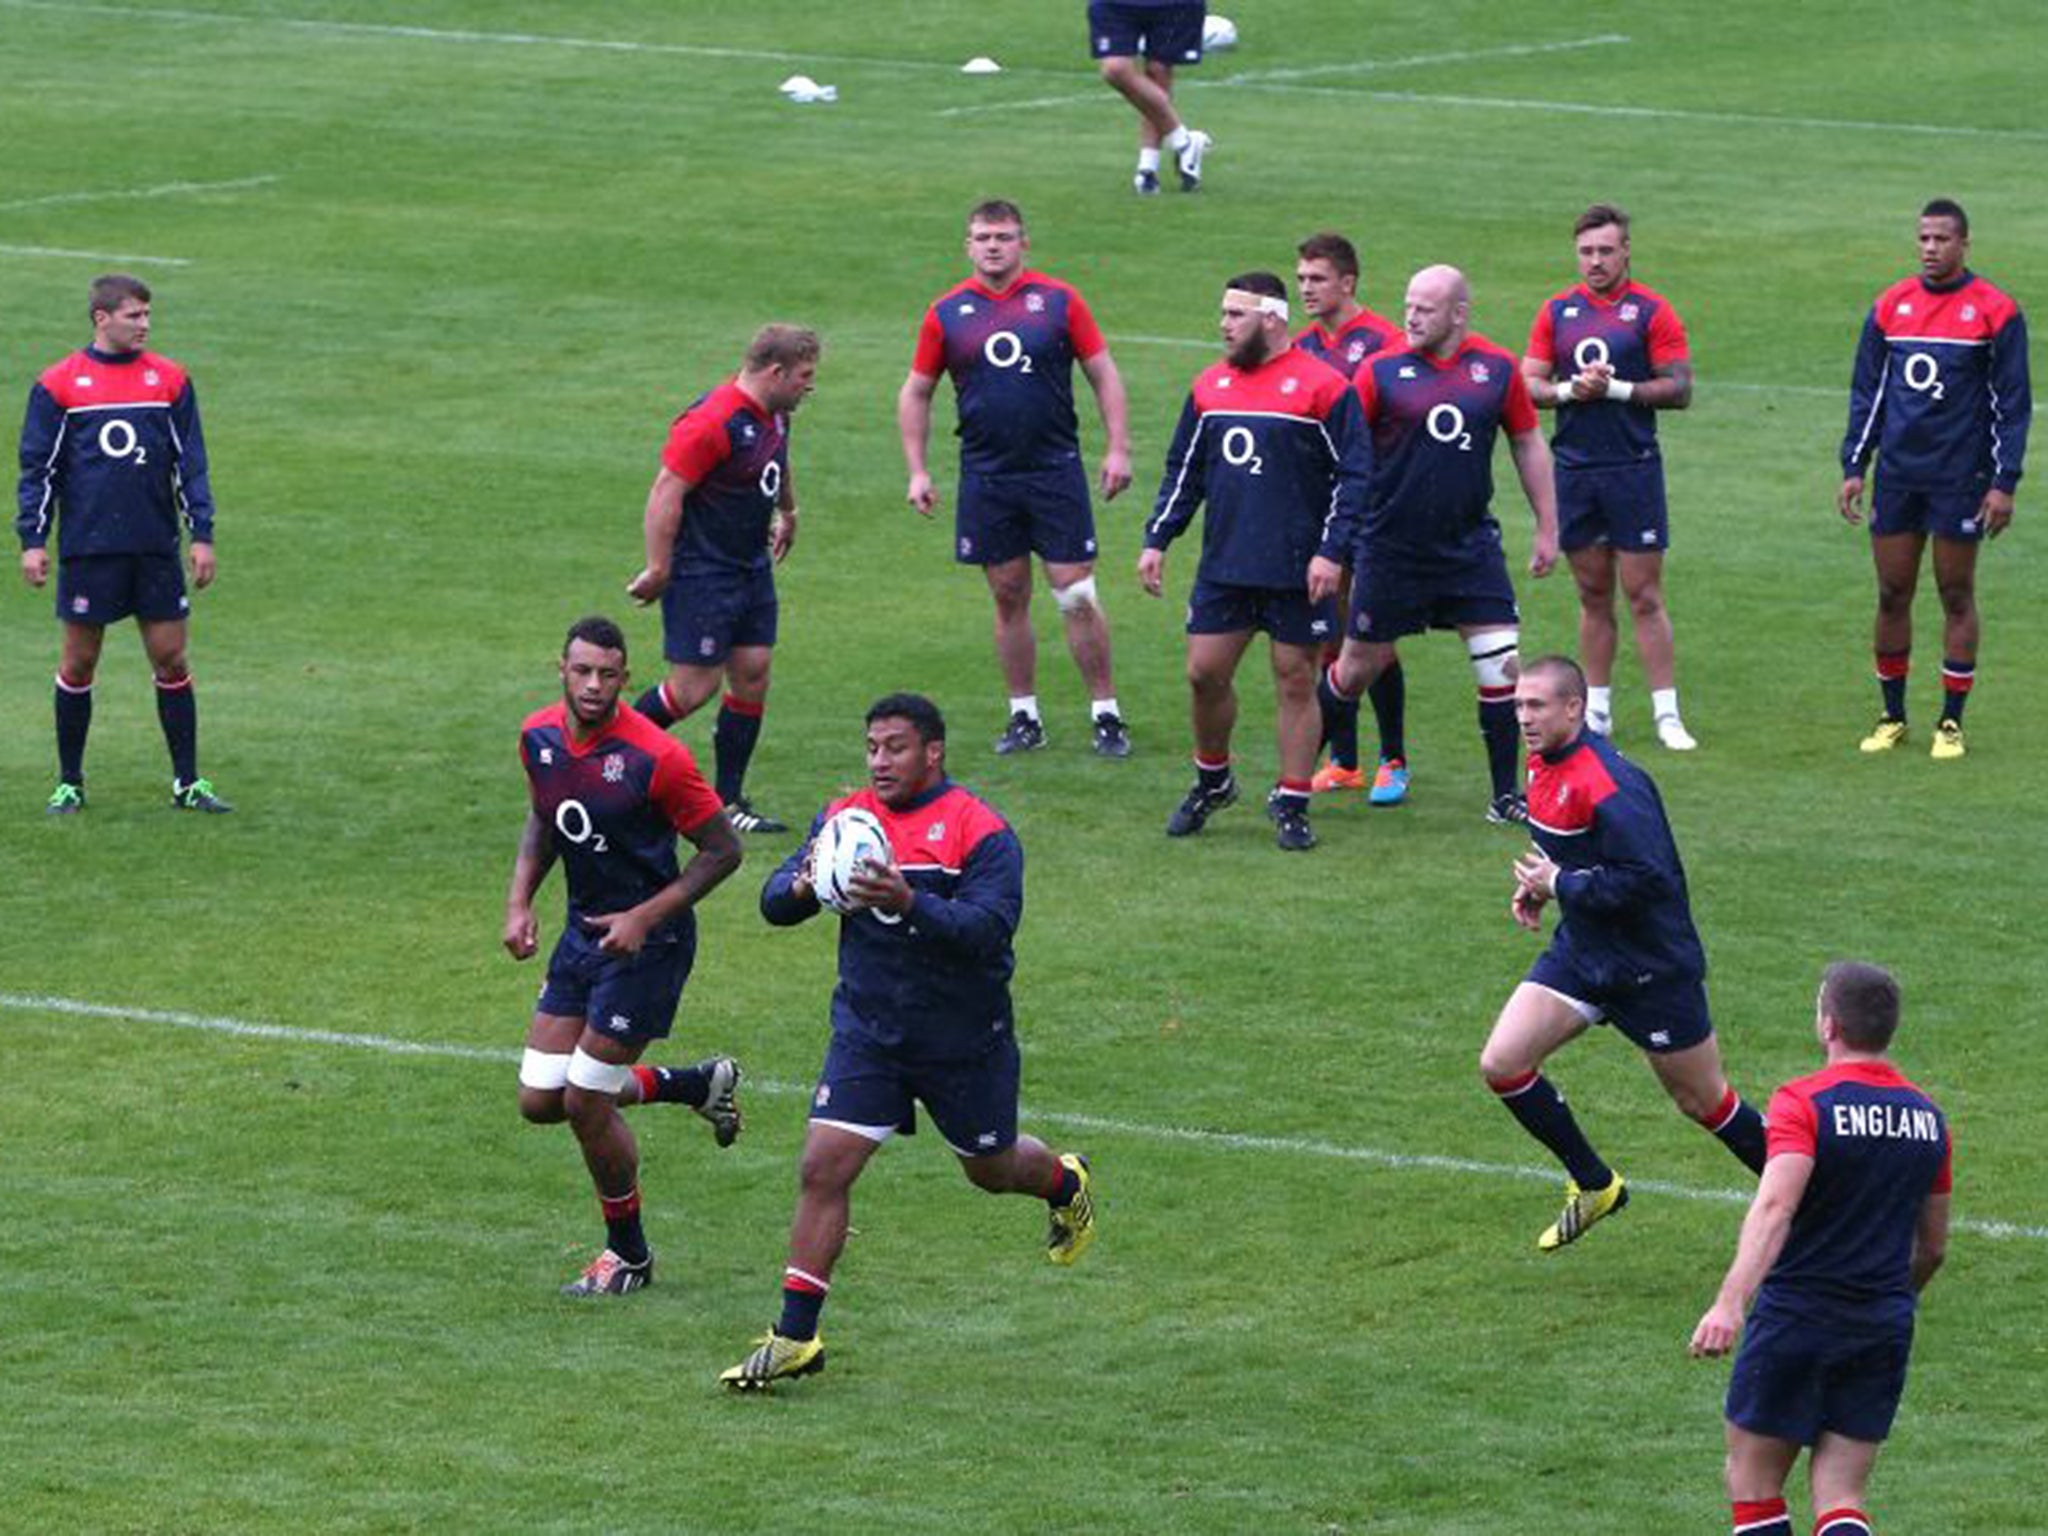 Mako Vunipola, with the ball in training on Monday, can add some clout off the England bench